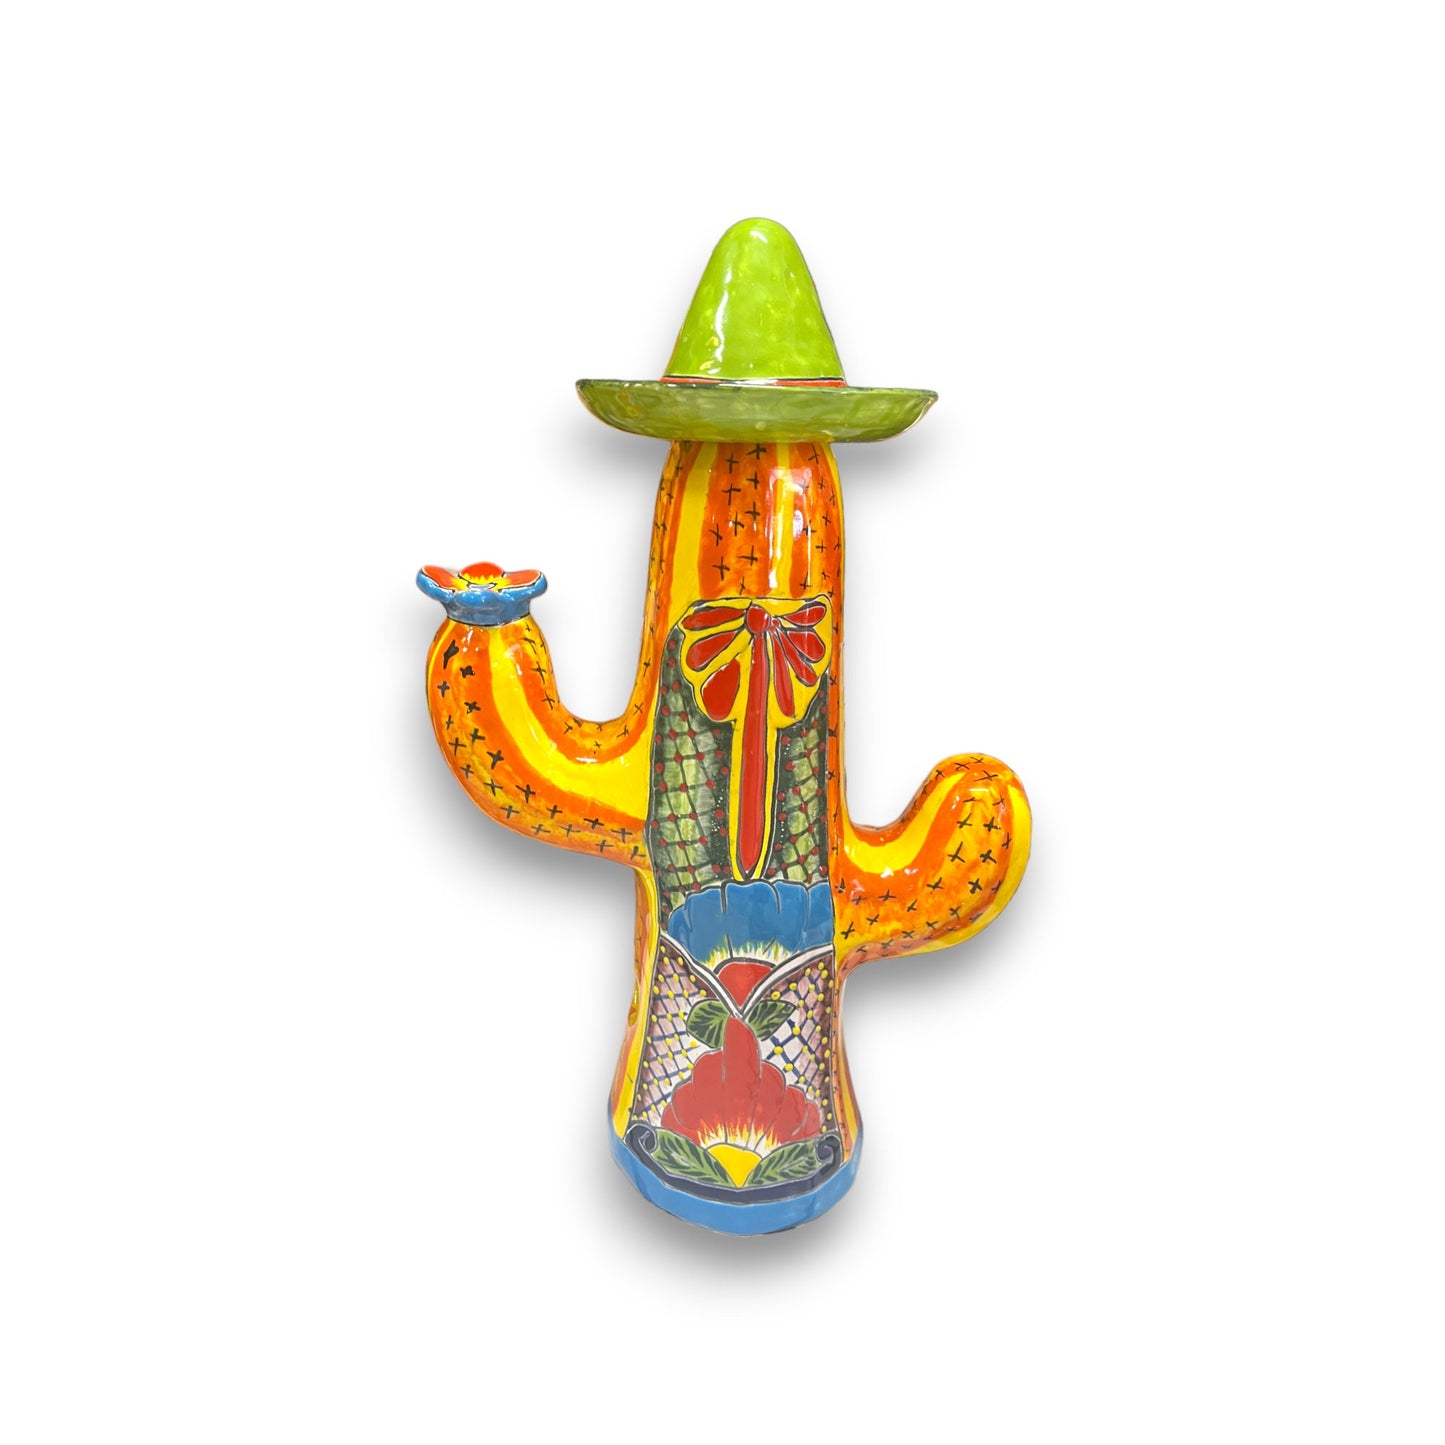 Handcrafted Talavera Cactus with Sombrero Statue | Medium-Sized Colorful Mexican Cultural Art